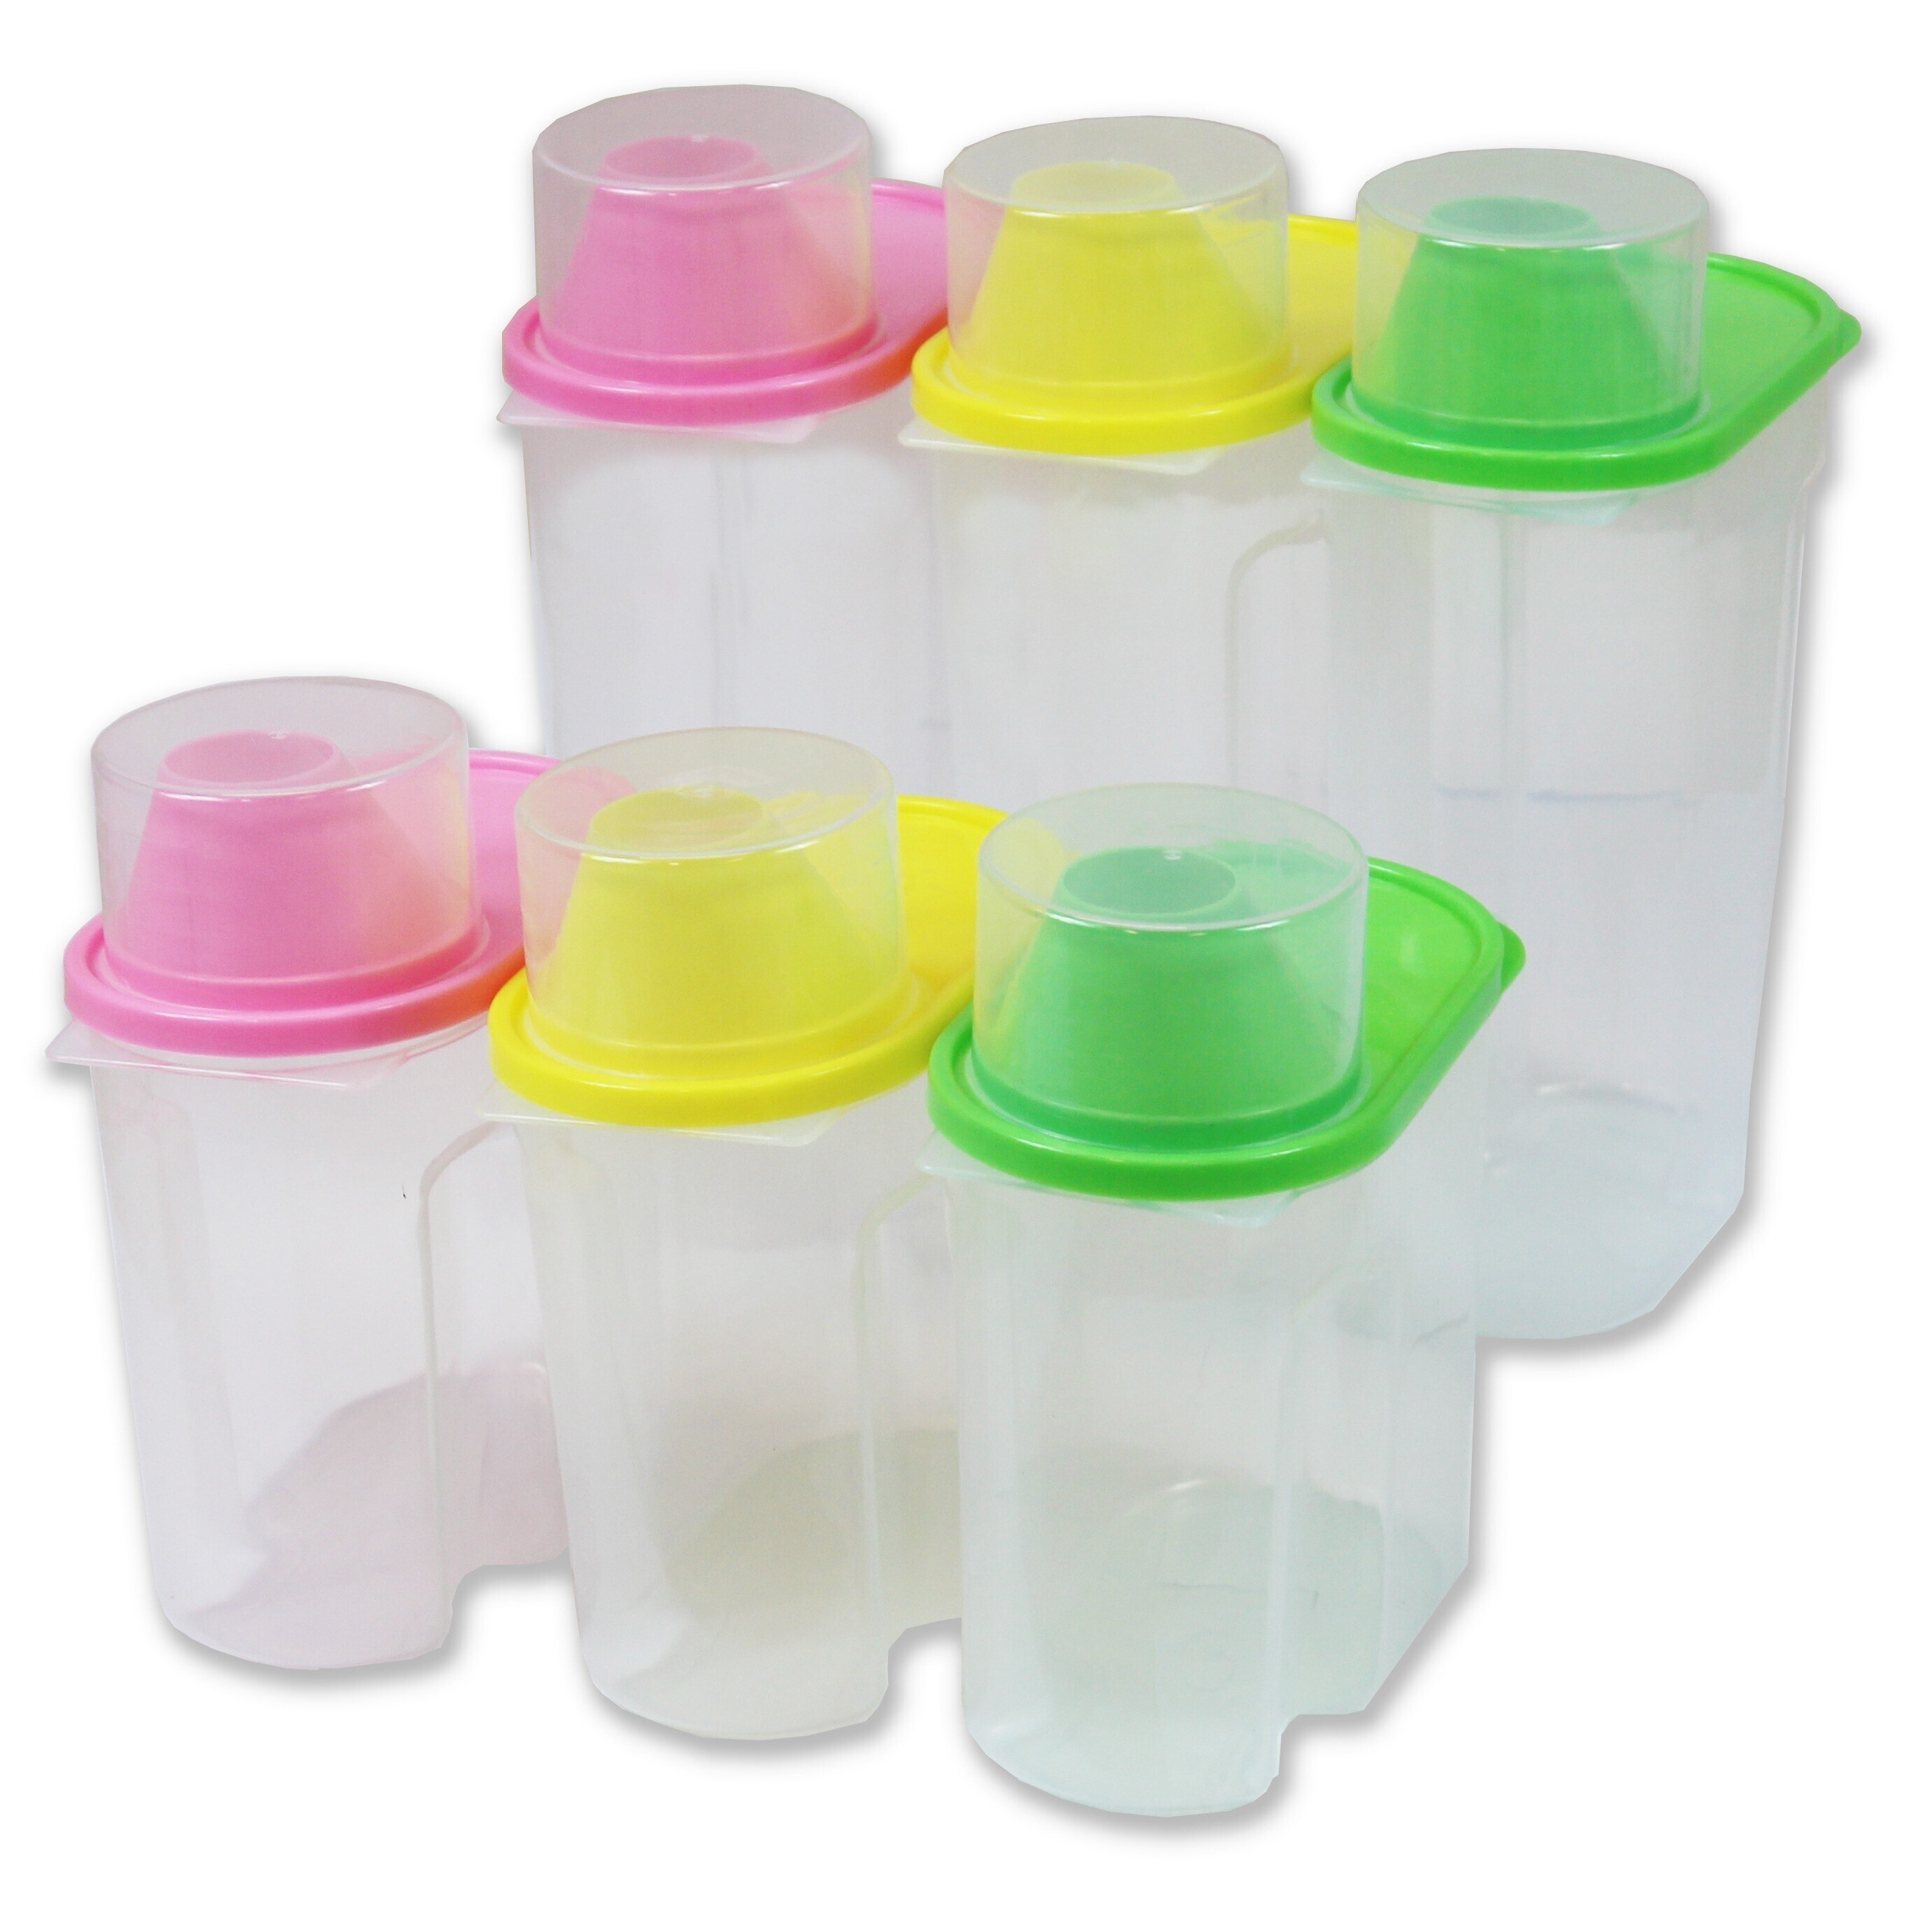 https://ak1.ostkcdn.com/images/products/is/images/direct/308b6a4e094bab1f9a65b8d07769e72da33b2a21/Basicwise-Green-Clear-BPA-free-Plastic-Food-Saver-Kitchen-Food-Cereal-Storage-Containers.jpg